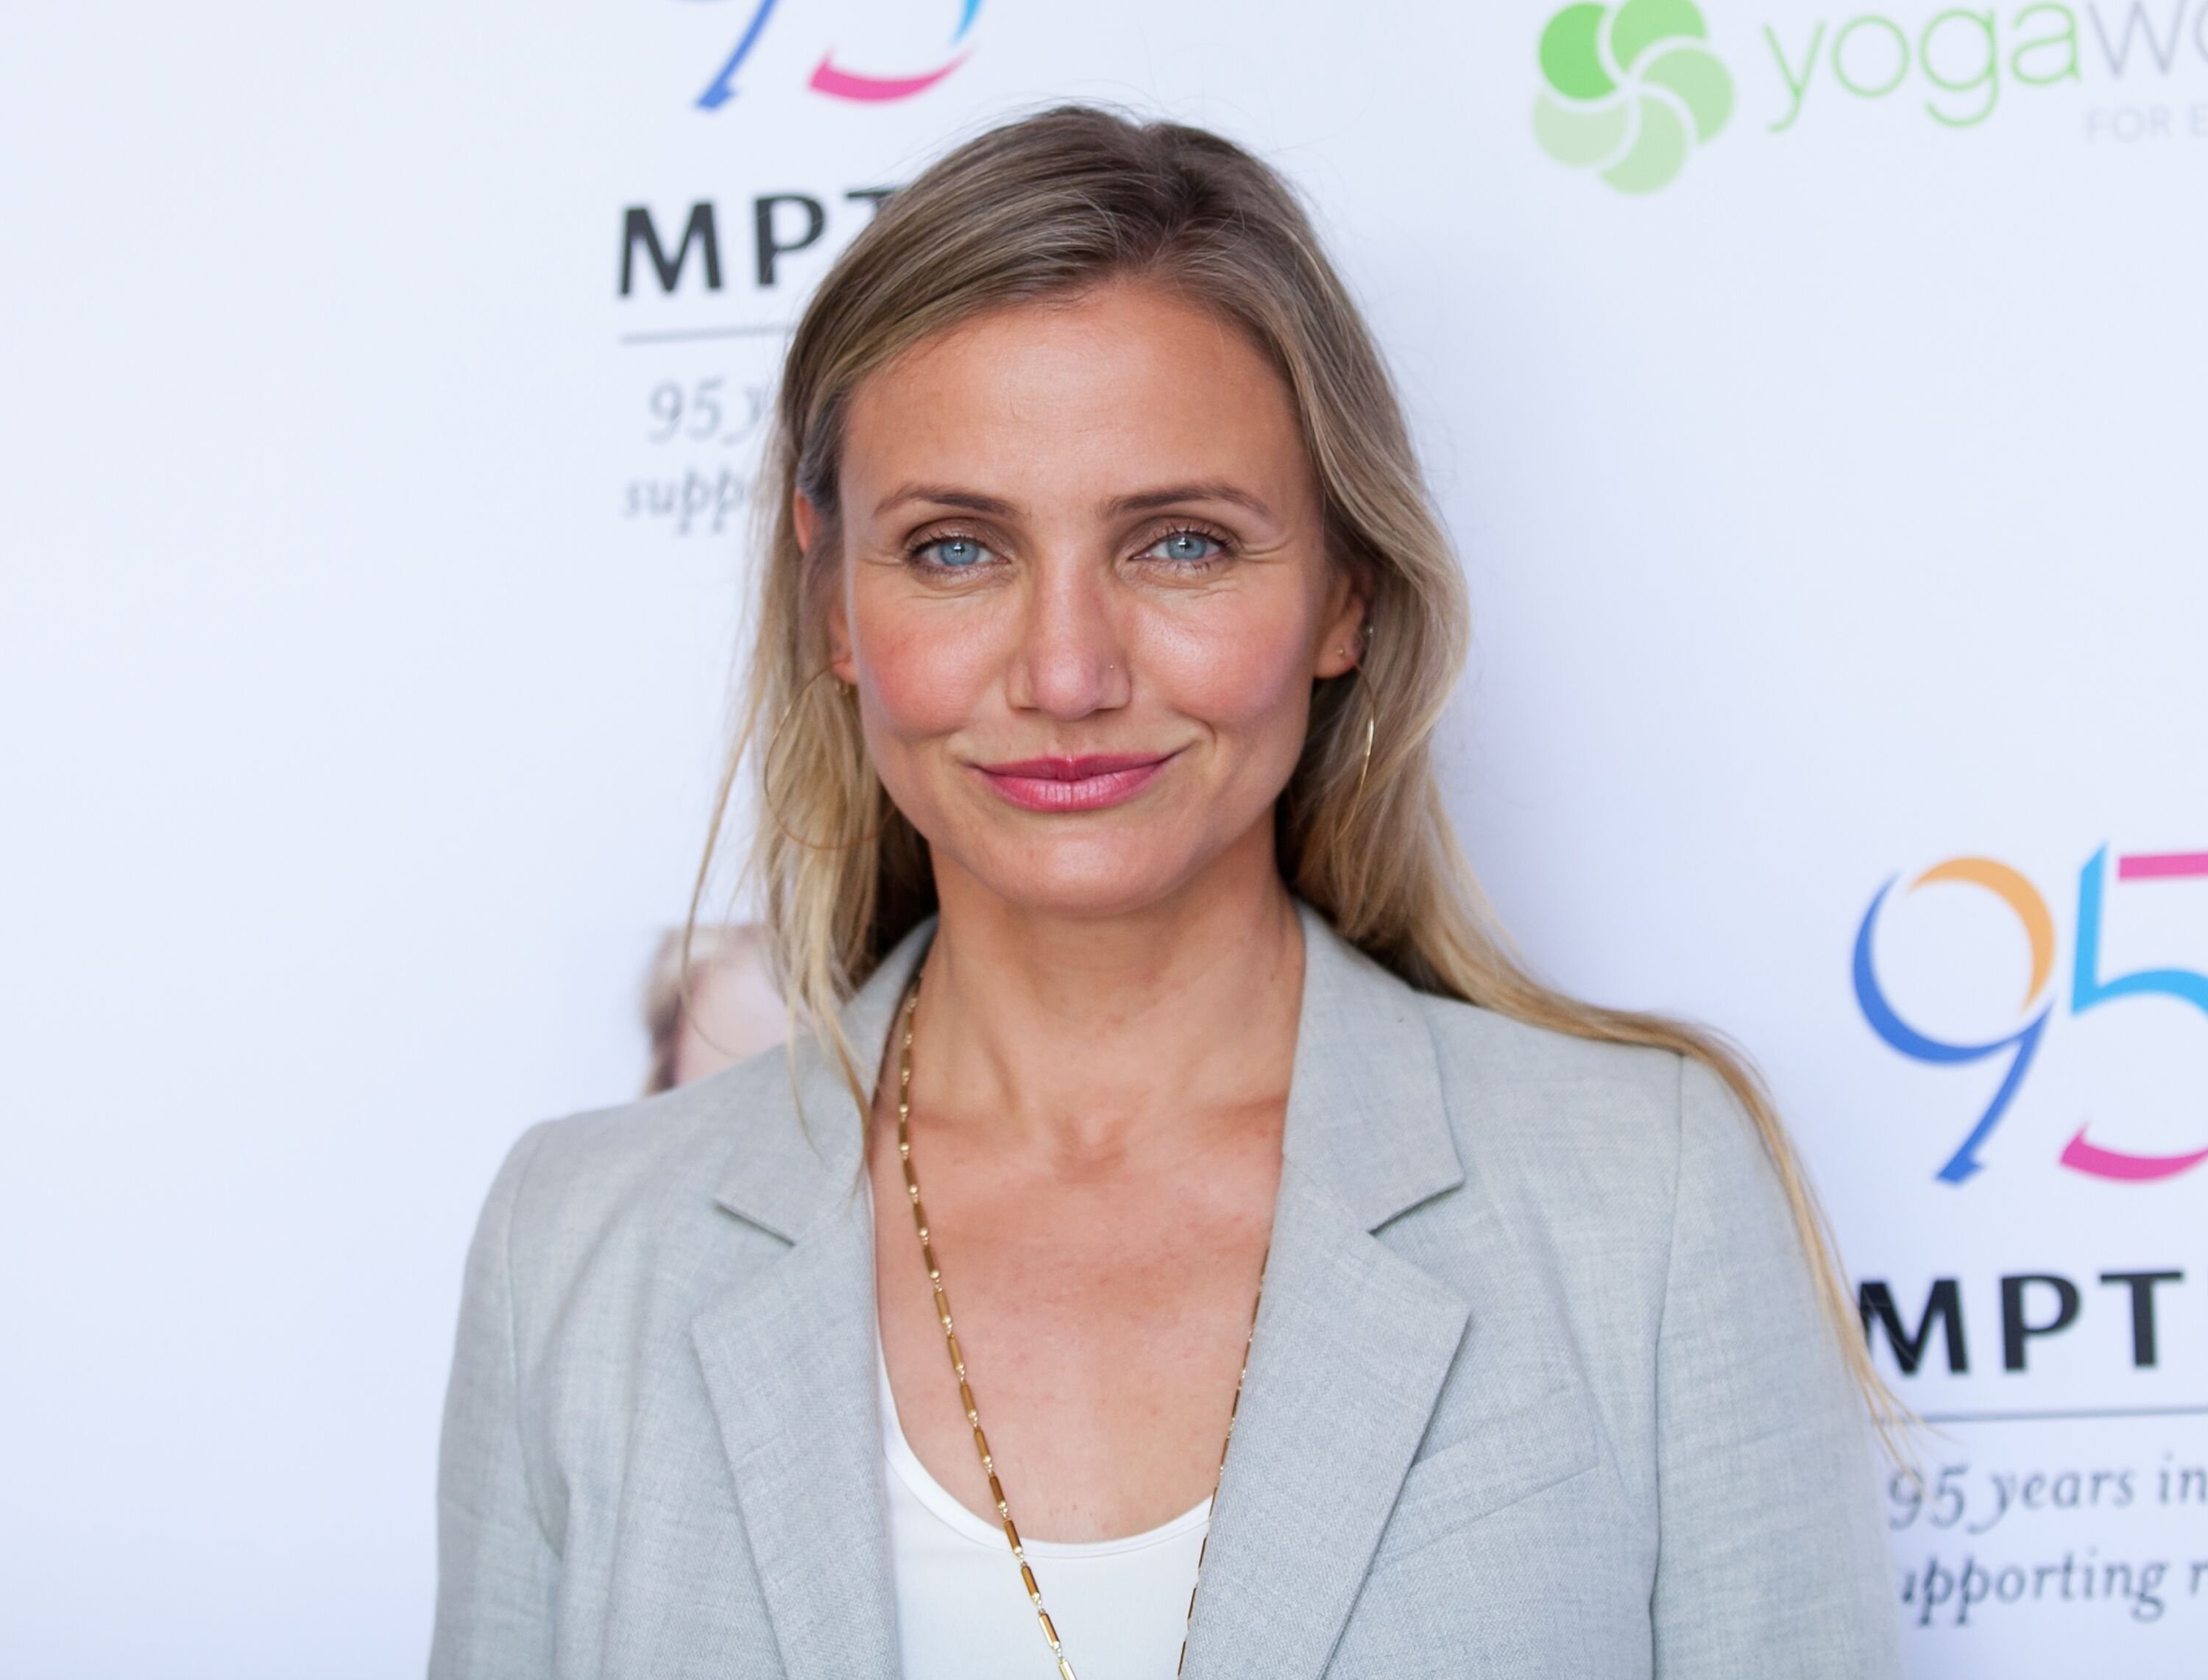 Cameron Diaz attends the MPTF Celebration for health and fitness in 2016 | Source: Getty Images